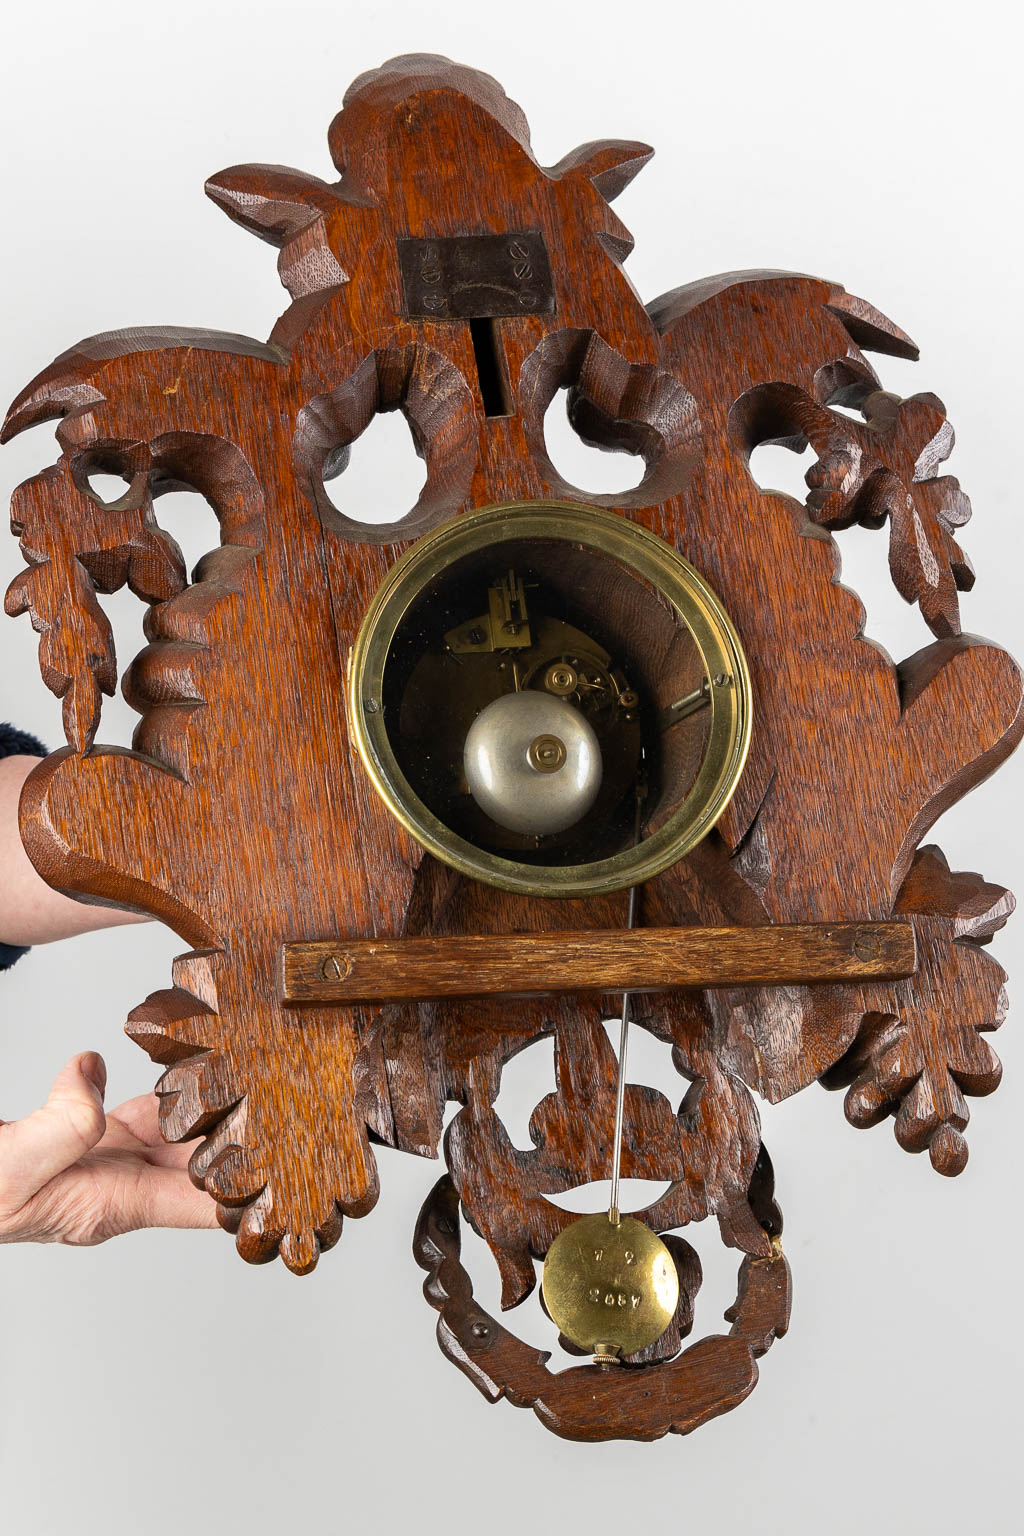 An antique Swiss or Black-Forest, wall-mounted clock. Circa 1880. (W:38 x H:53 cm)